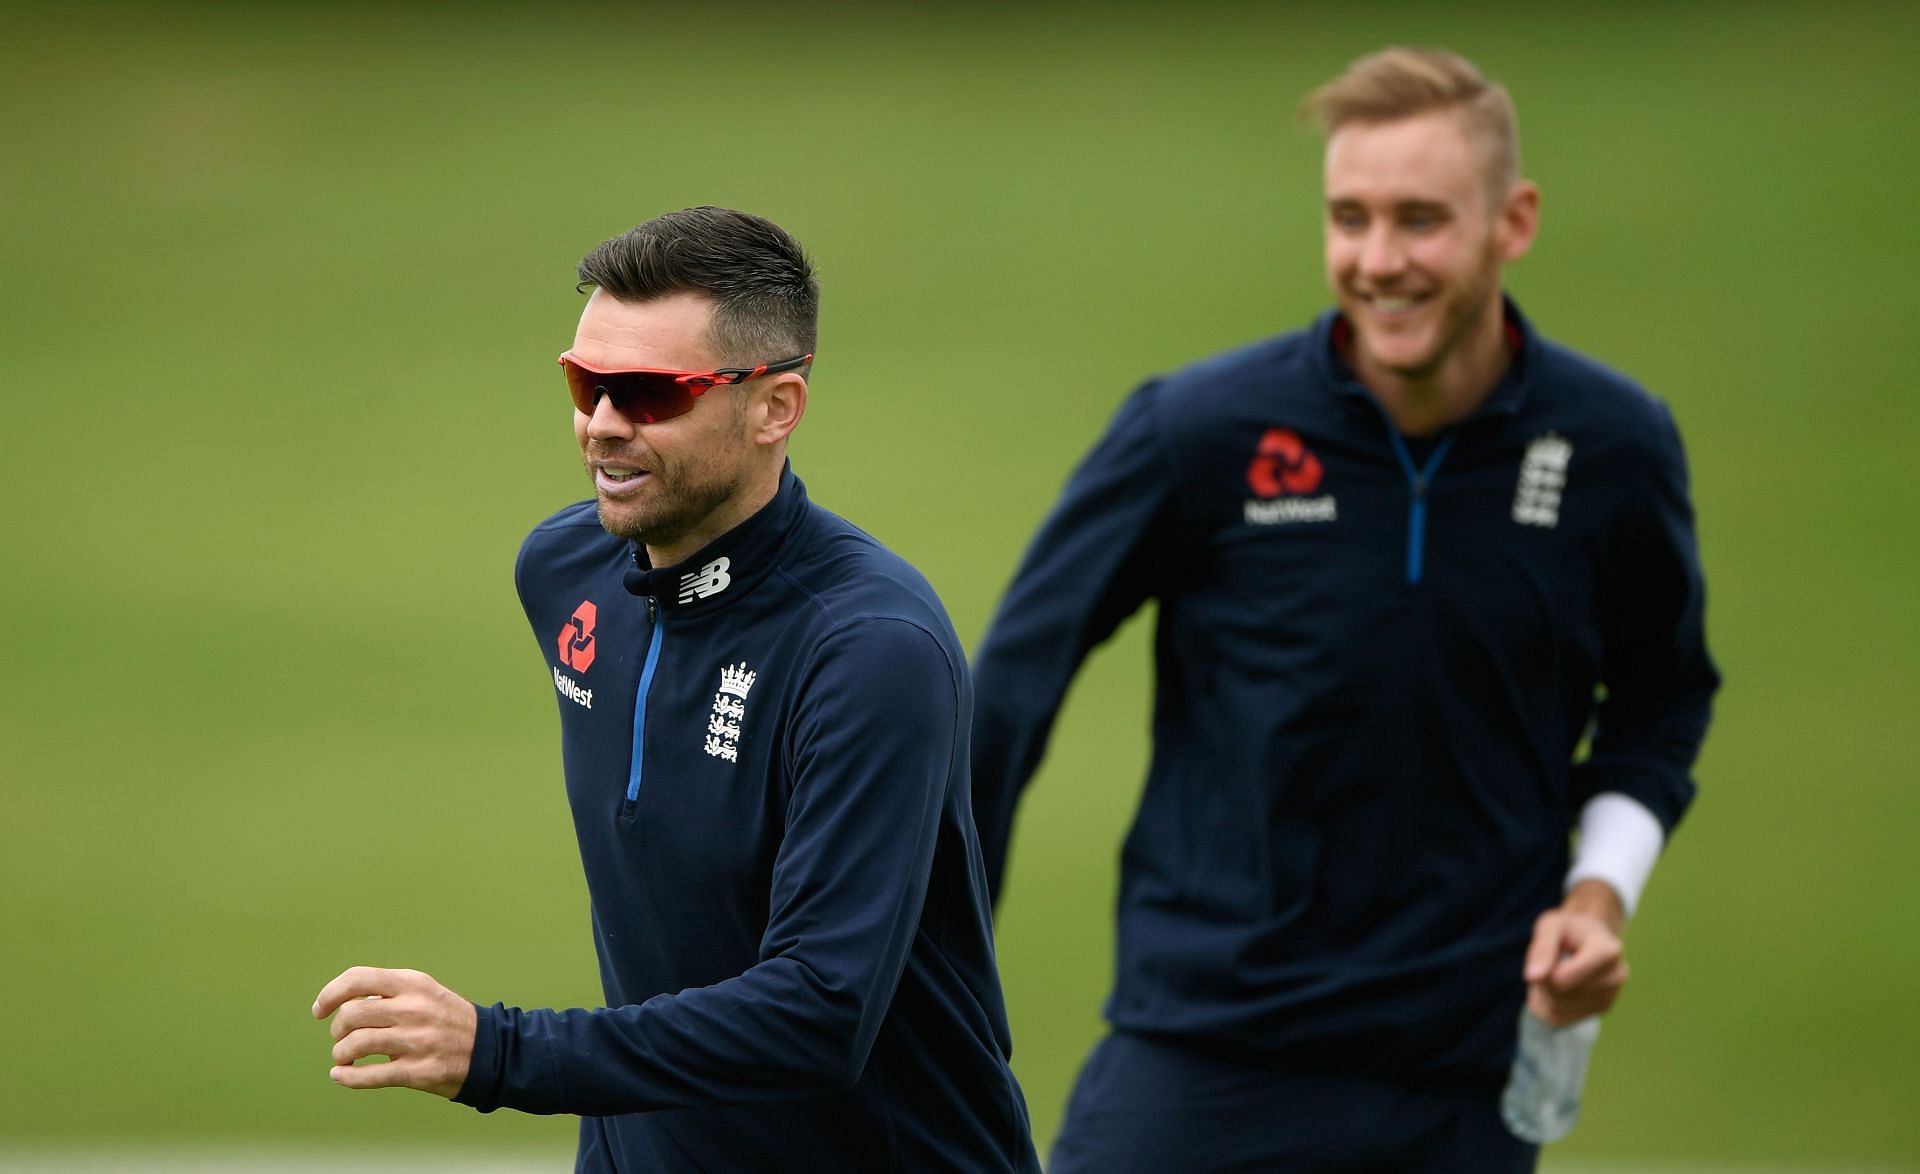 England Nets Session vs New Zealand in 2018 [Getty Images]